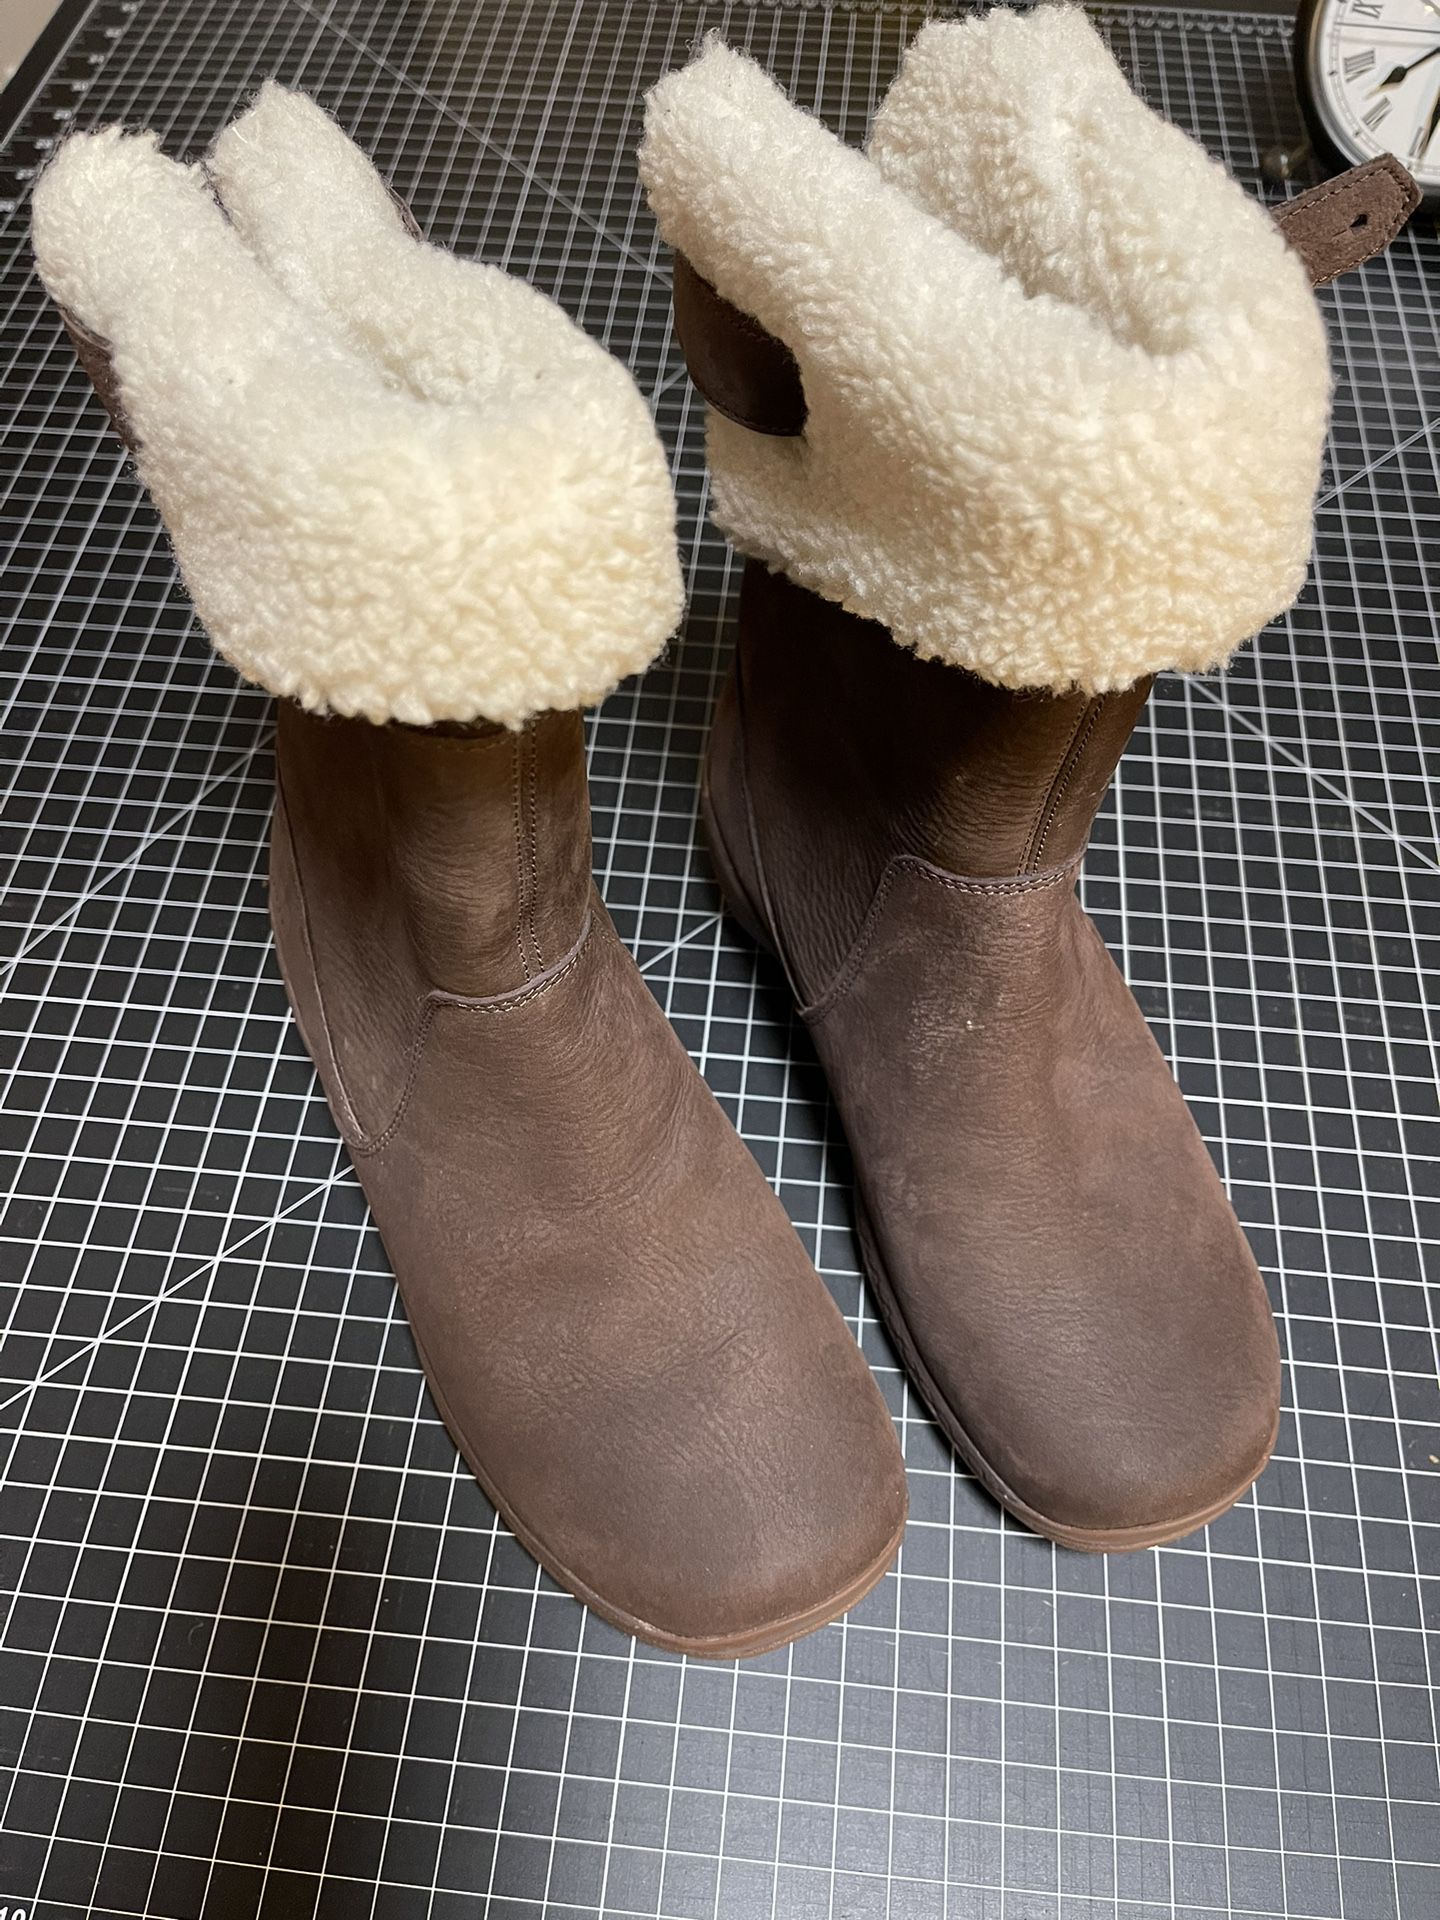 Merrill, NEW Women’s Size 8, Quality Waterproof Nubuck Leather, Fur and  Fleece Lined Boots, $30.00